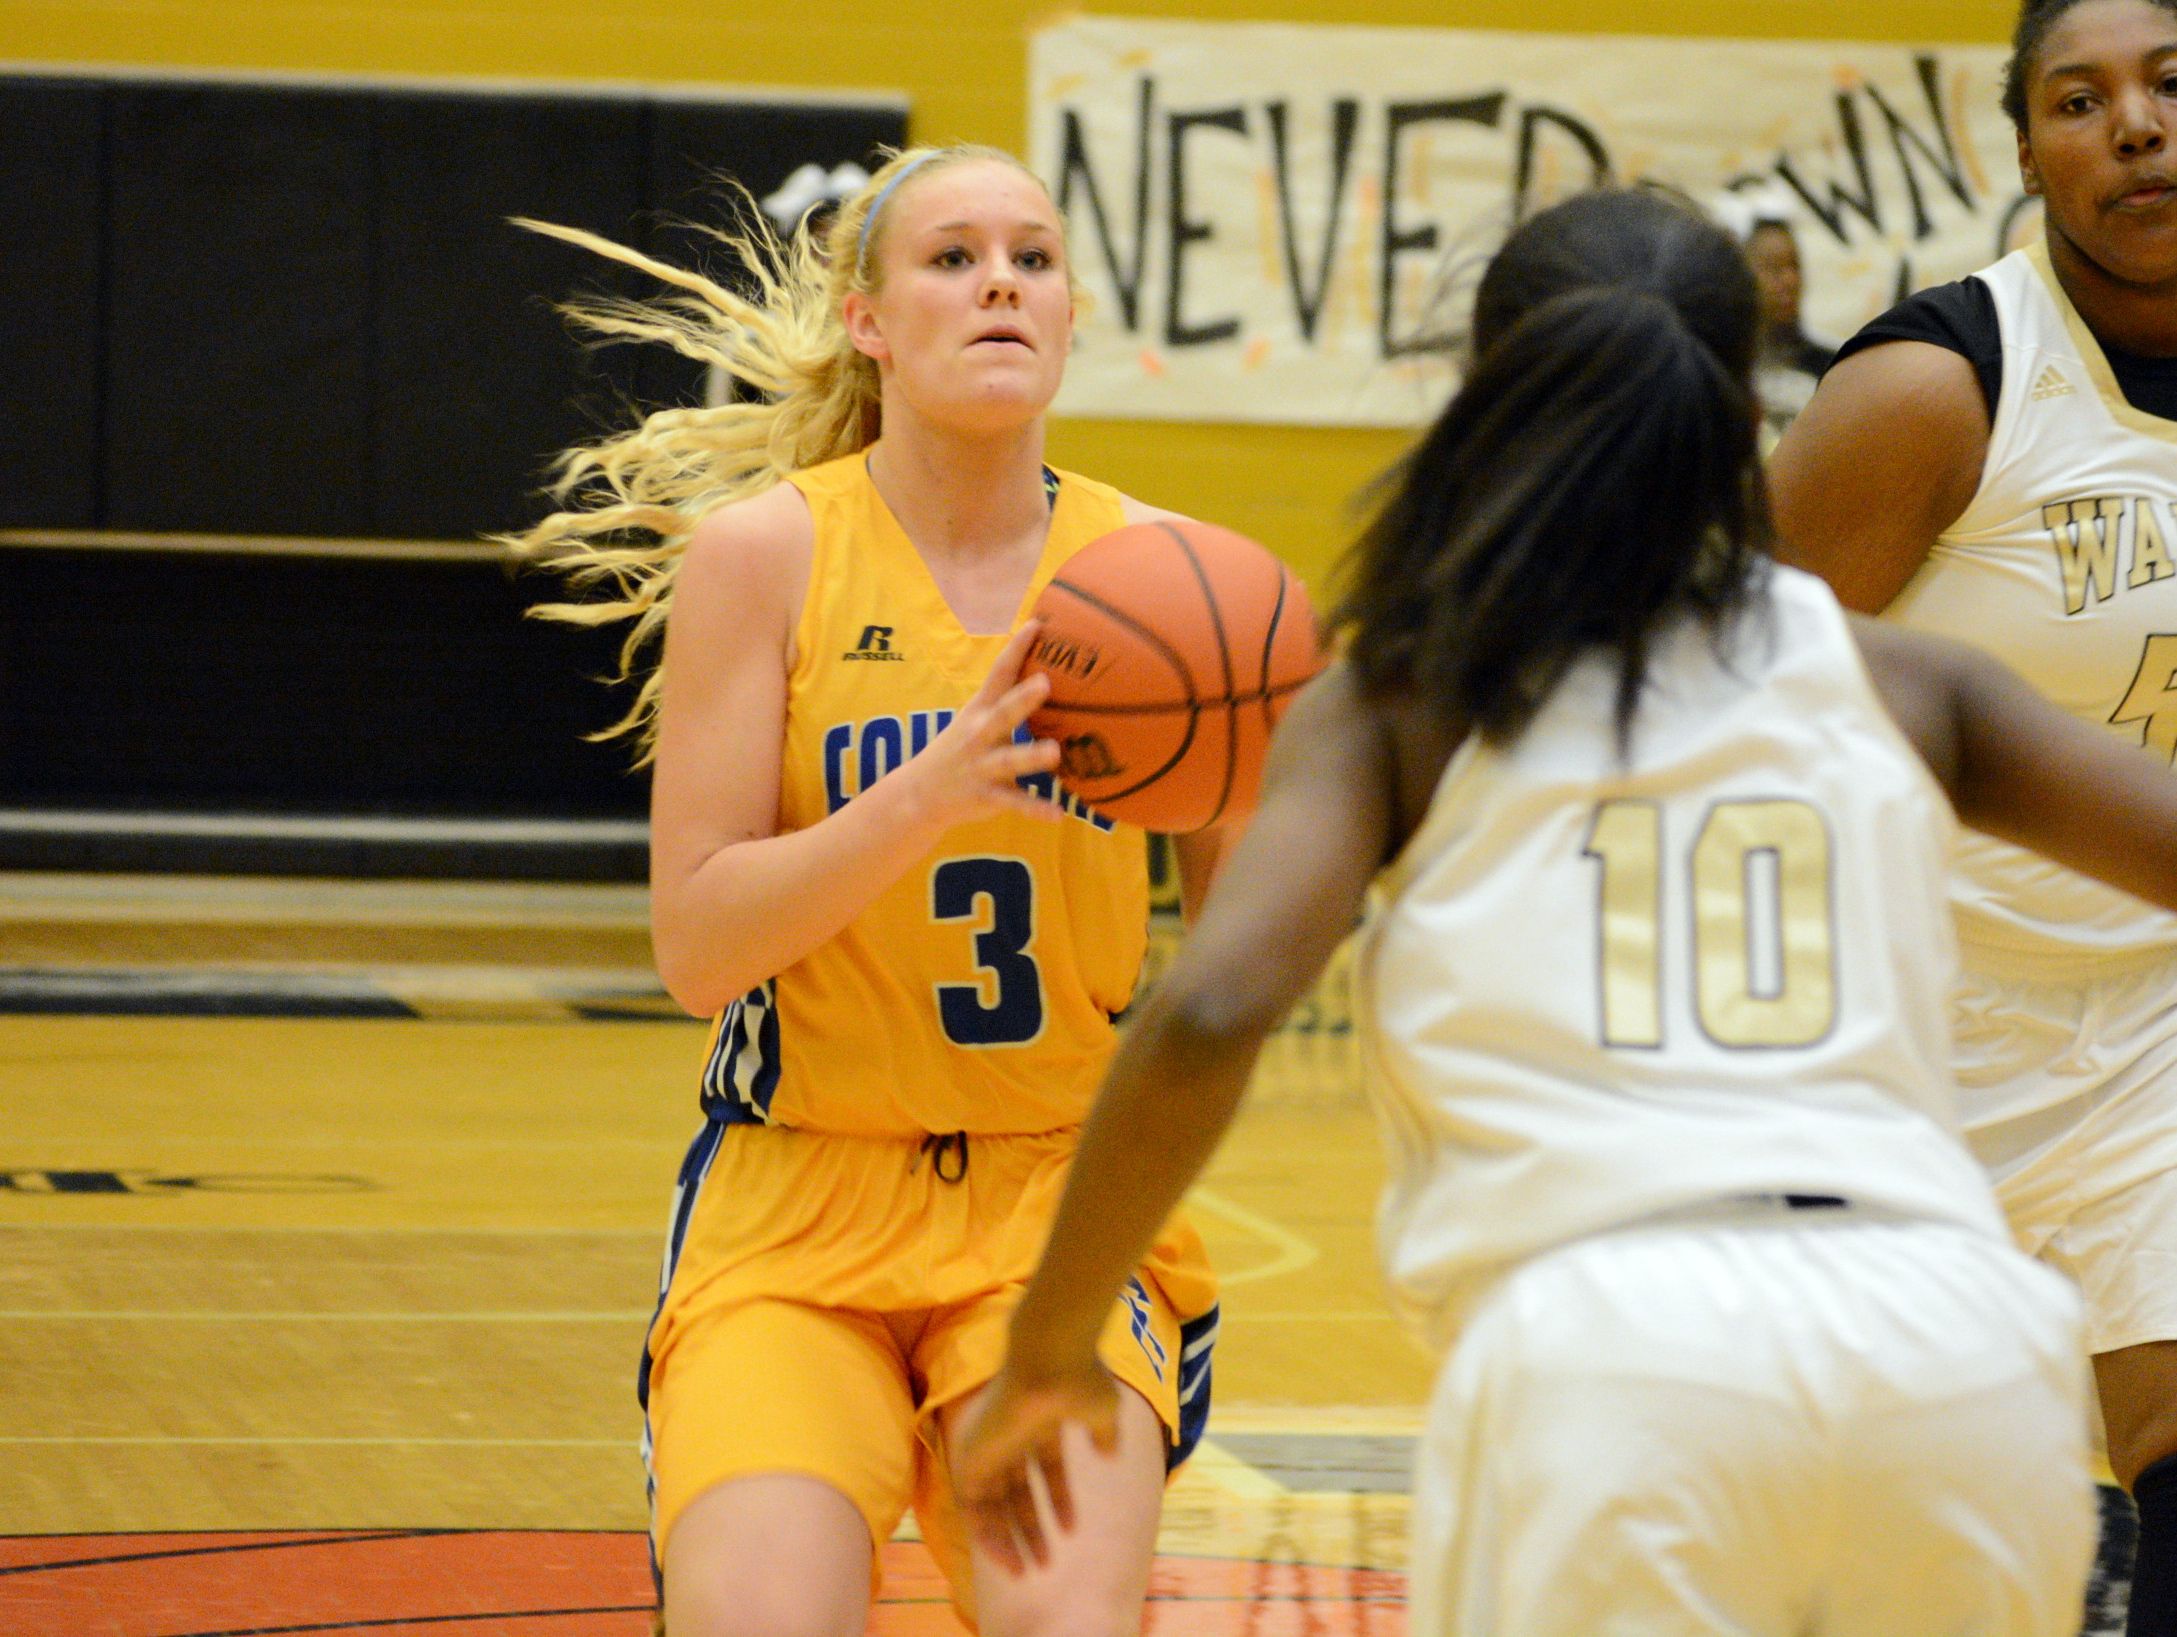 Greenfield-Central's Madison Wise averaged 22.7 points per game as a junior.